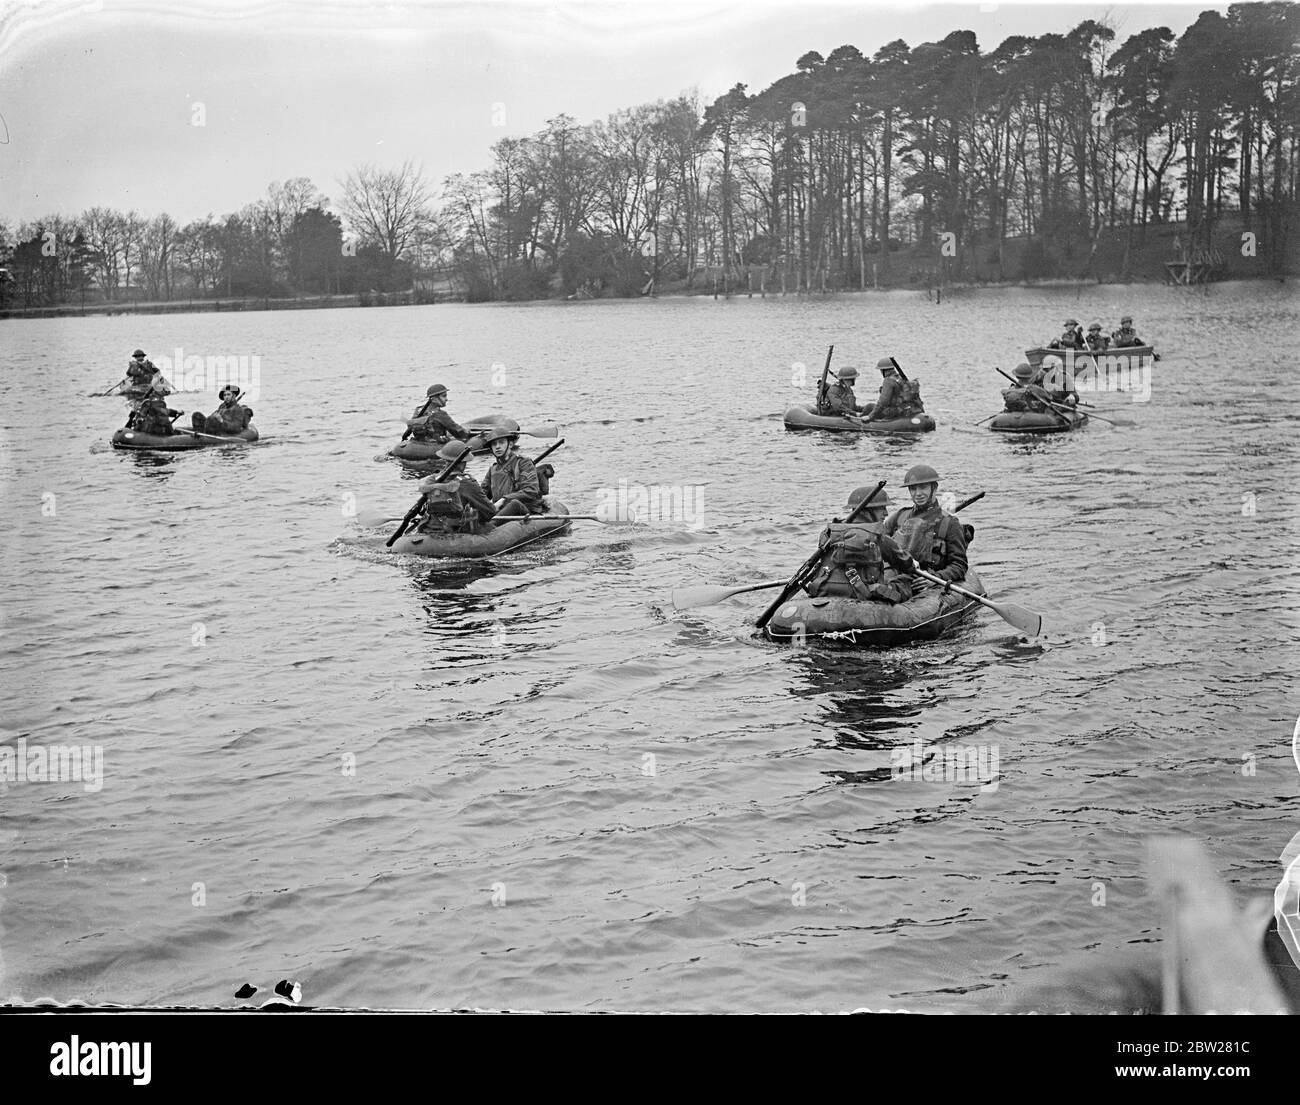 Troops ford Lake in aero boats at Aldershot demonstration. Latest equipment and training methods of infantry detachments of the British Army demonstrated by the first Battlalion the South Staffordshire Regiment in a series of exercises at Mytchett, near Aldershot, Hampshire. Photo shows, , troops fording Mytchatt Lake in pneumatic Aero Boats. The boats, which can be folded into a small space, carry two men with their equipment. 21 January 1938 Stock Photo